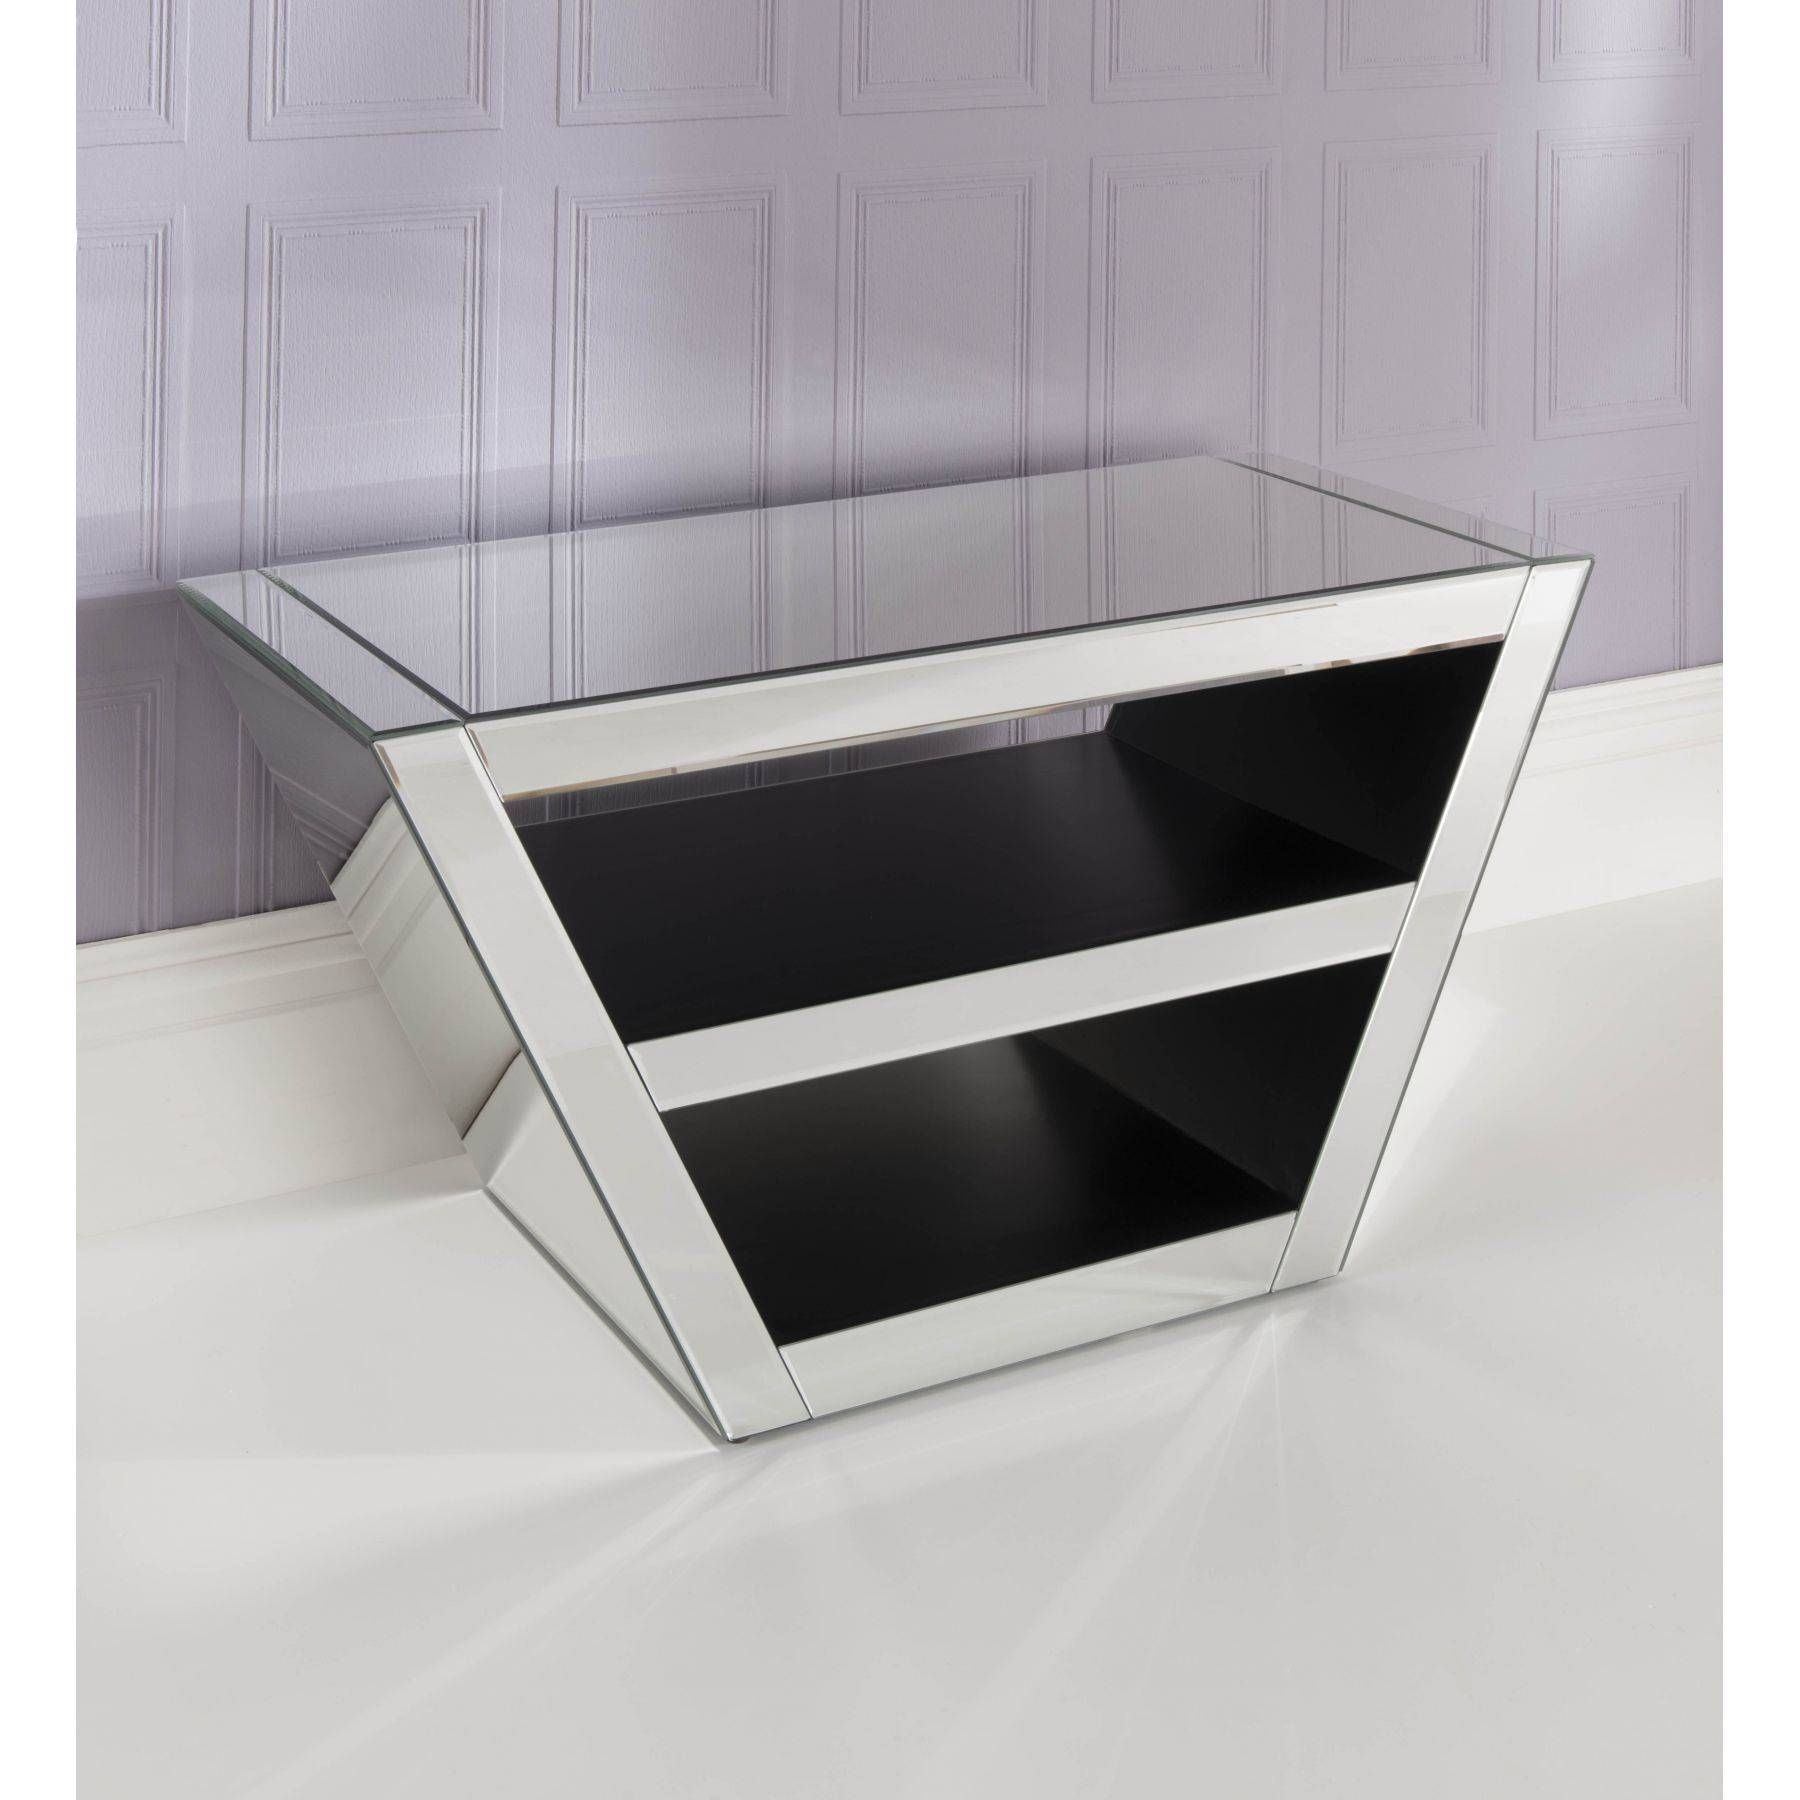 Mirrored Tv Cabinet | Venetian Glass Tv Stand | Homesdirect365 Pertaining To Glass Tv Cabinets (View 3 of 15)